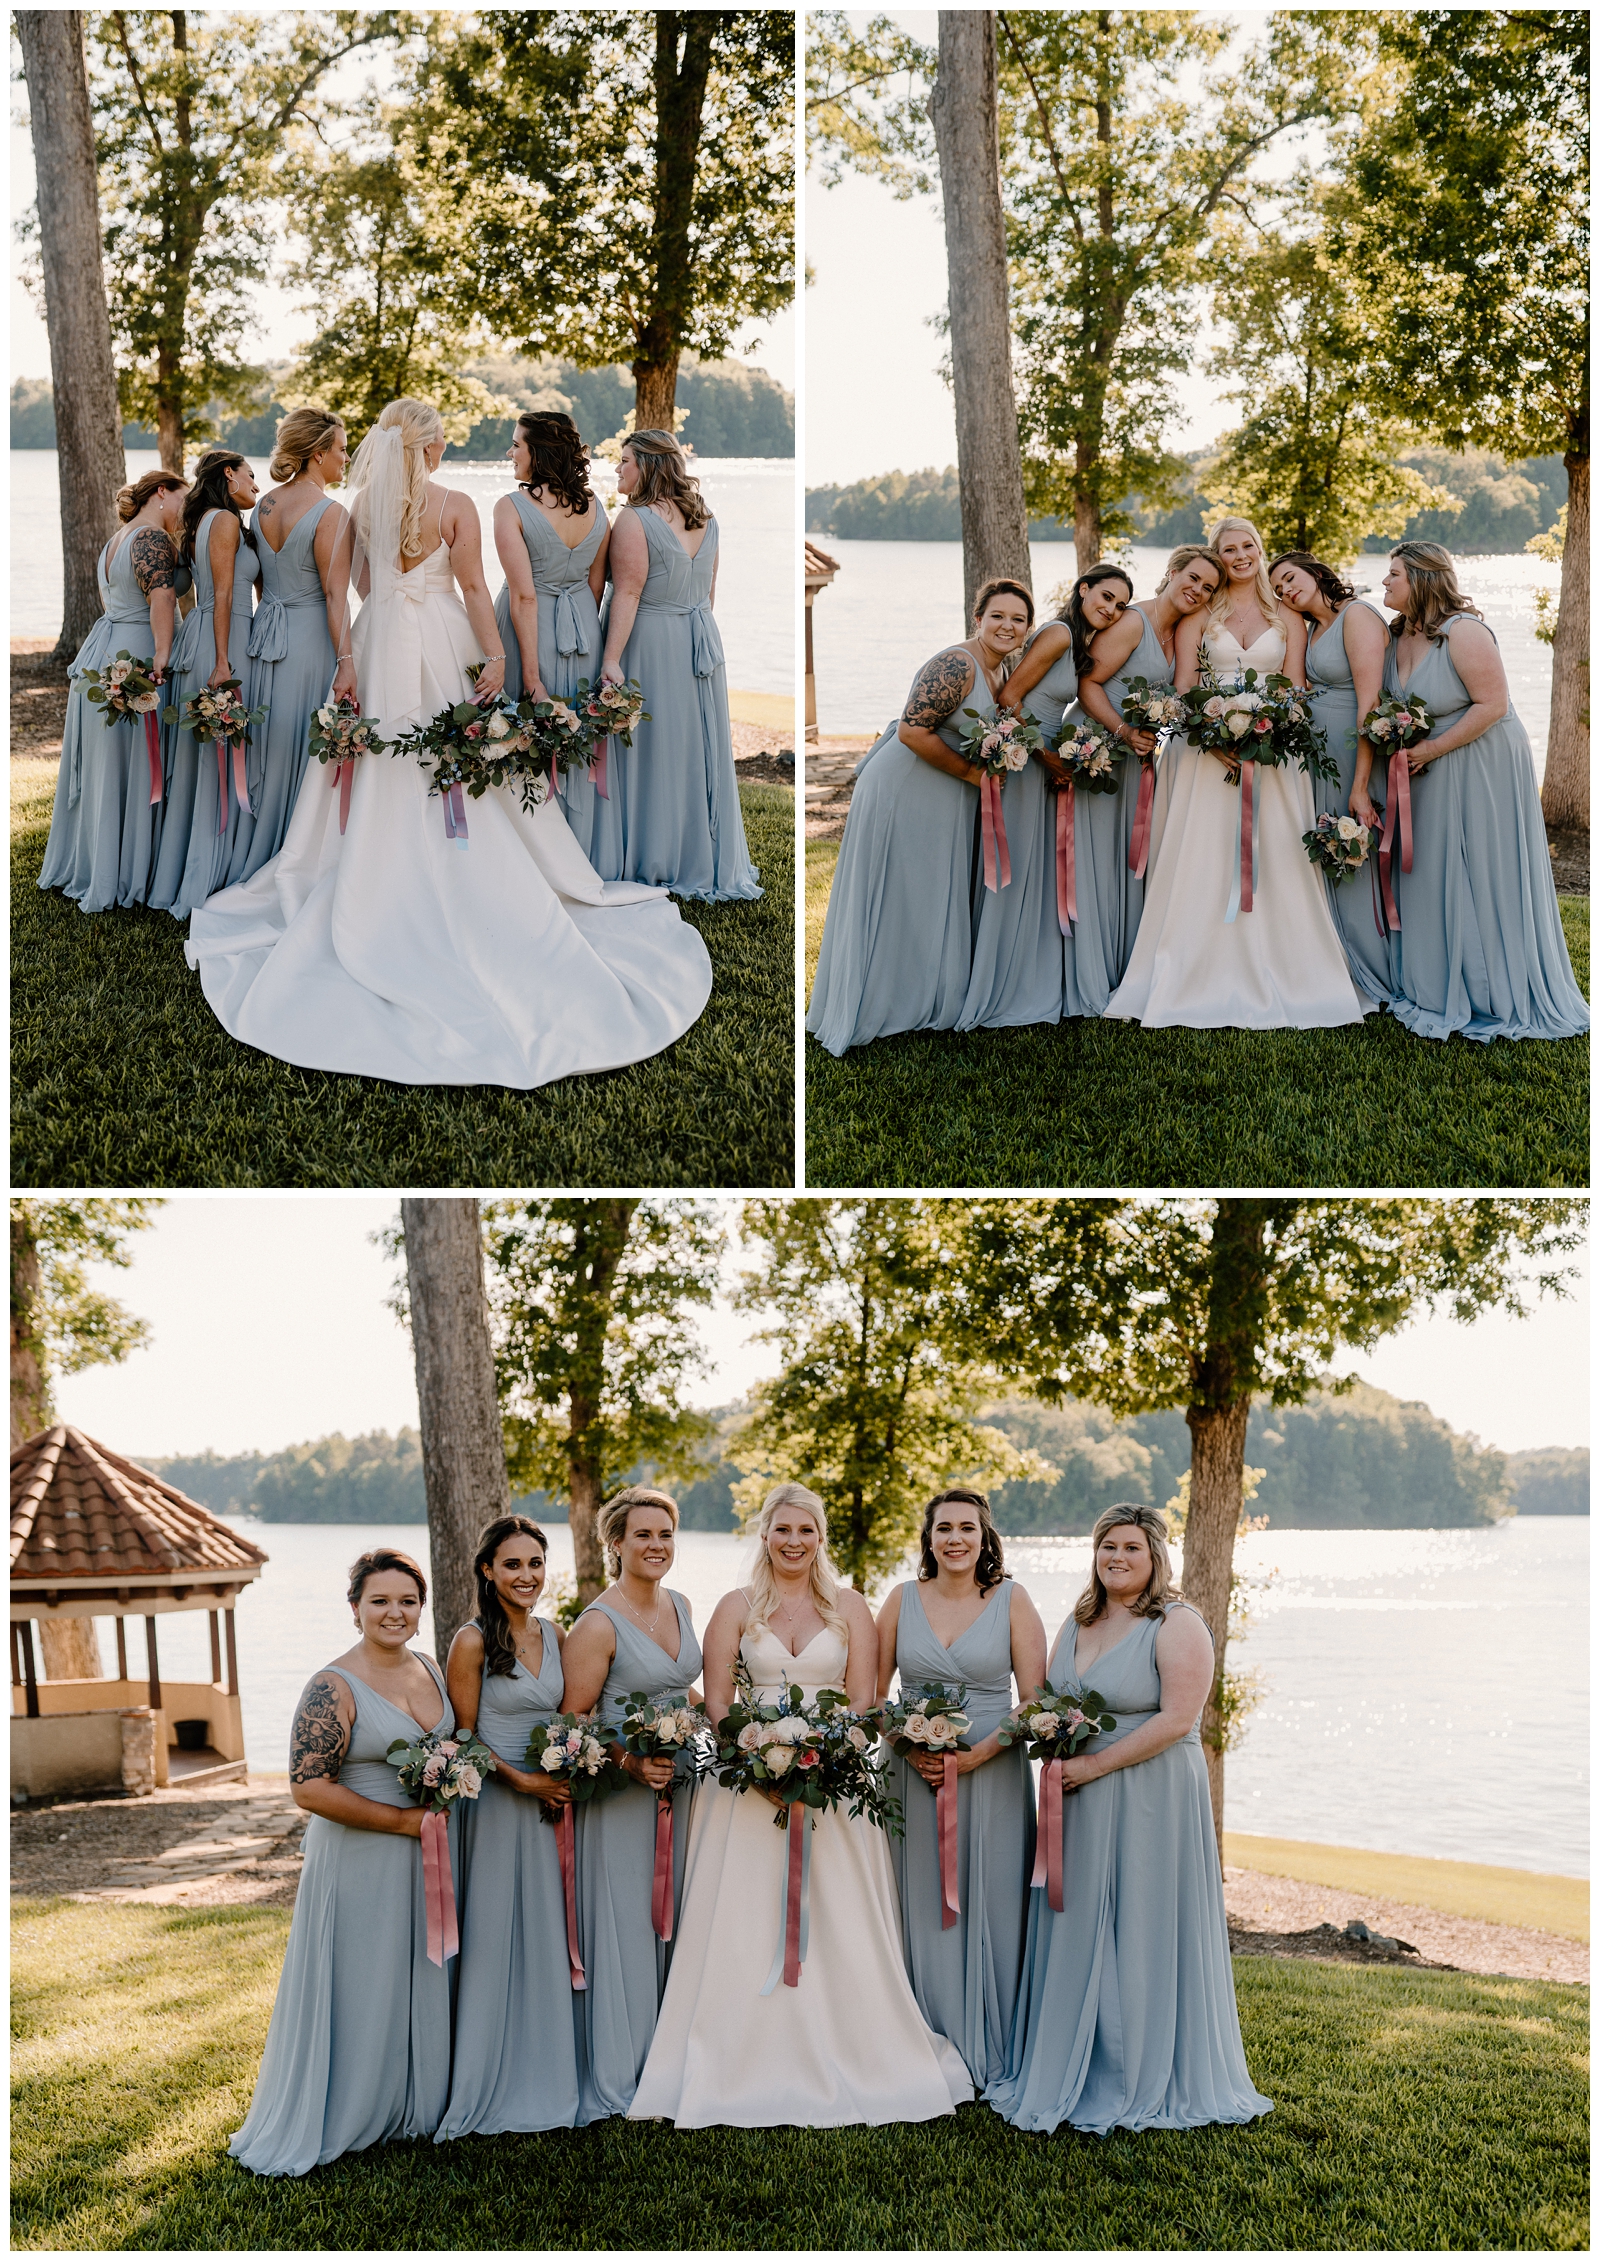 Bride and her bridesmaids portraits on her southern lakeside wedding day - by NC photographer